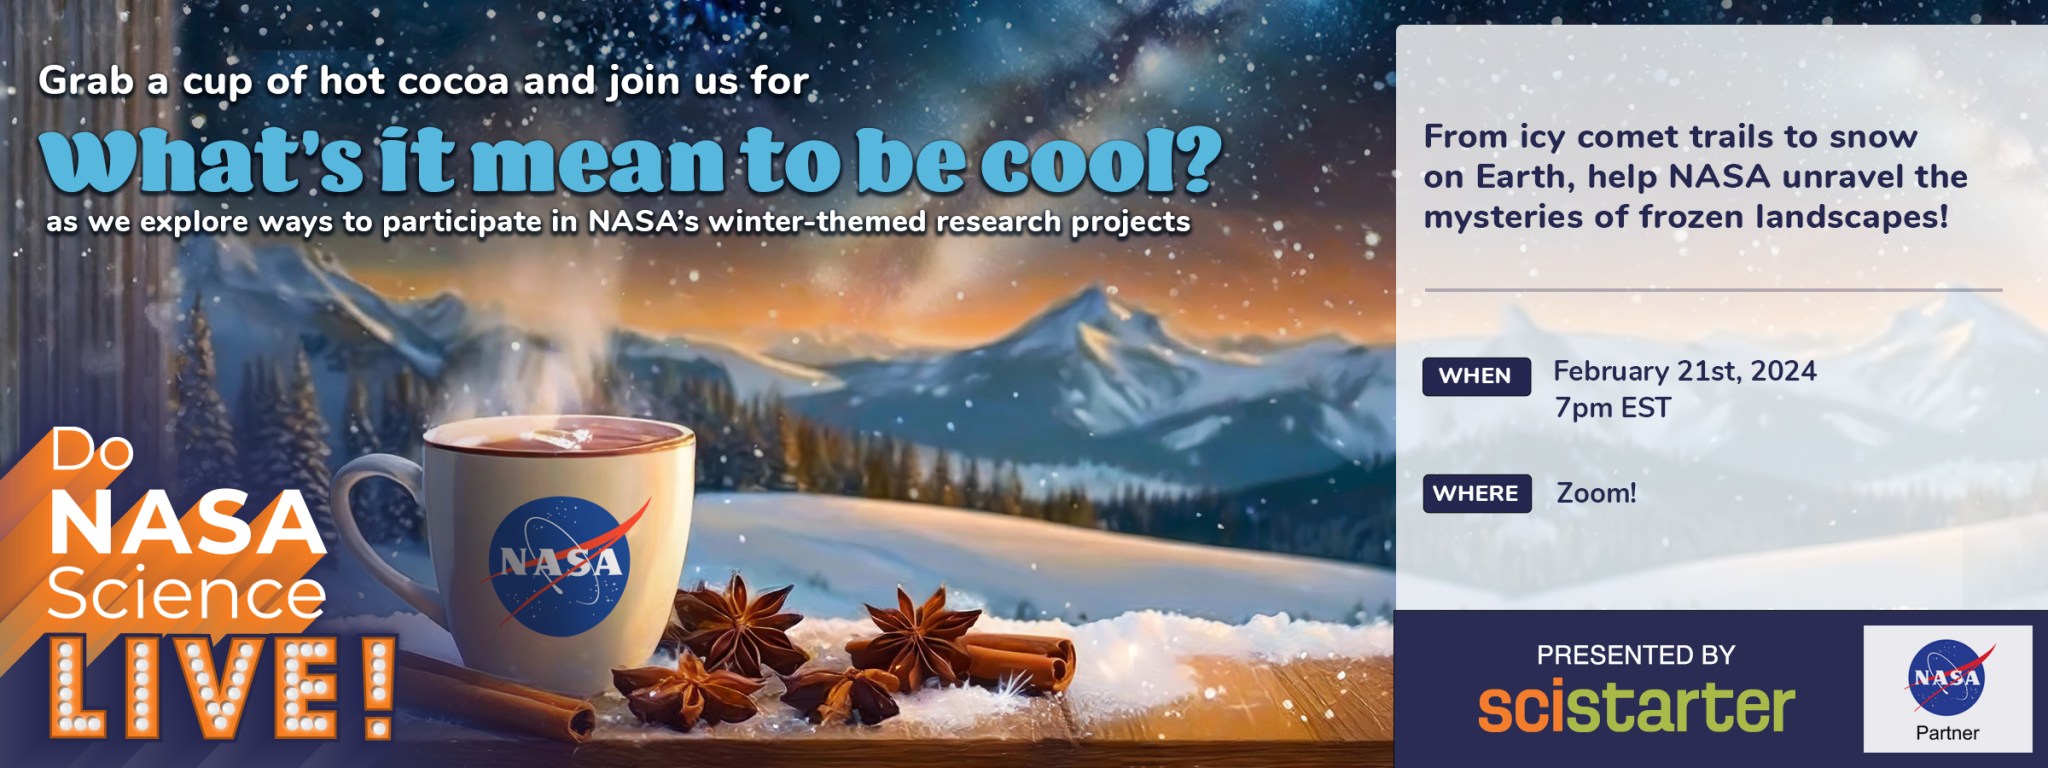 Do NASA Science LIVE on February 21! What’s it mean to be cool?